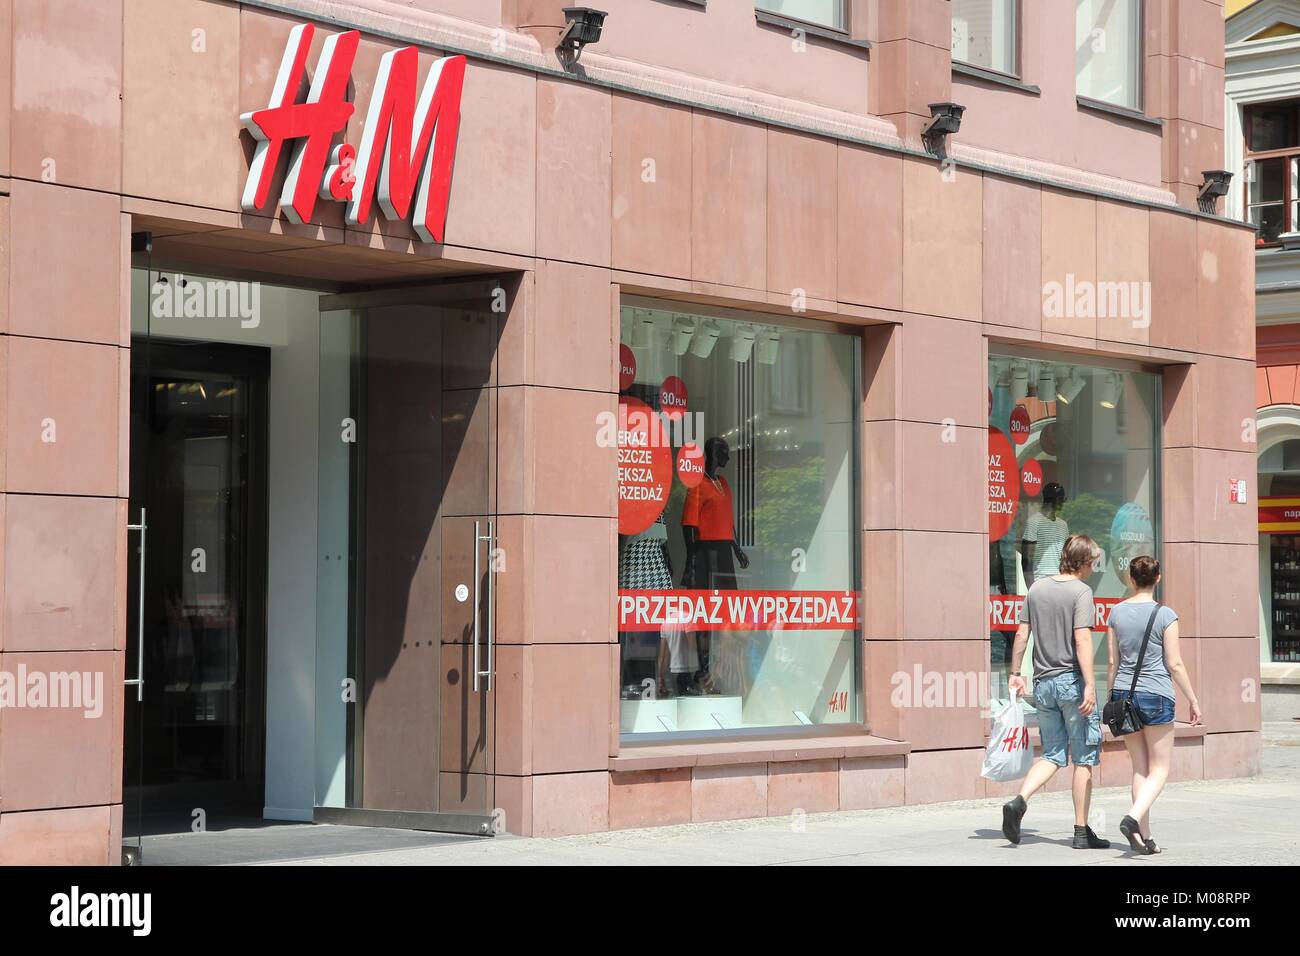 WROCLAW, POLAND - JULY 6, 2014: People shop at H&M fashion store in Wroclaw.  H&M is an international fashion retail corp known for its fast fashion ap  Stock Photo - Alamy